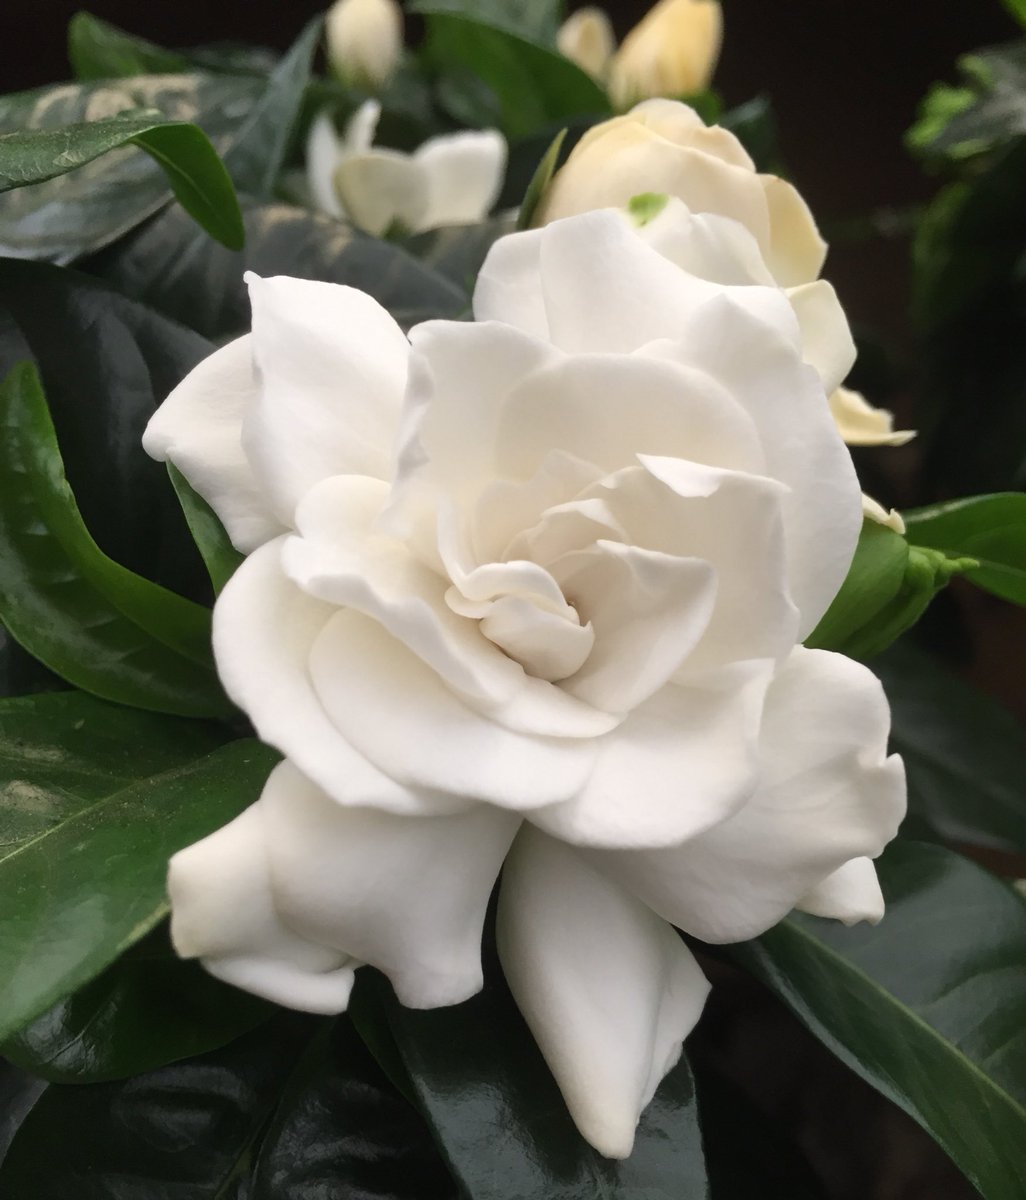 Gorgeous Gardenia smelling so sweet! A natural air freshener for your home that actually helps purify the air too! #WednesdayWisdom #flowers #scentedflowers #awesomeplants #gardenia #houseplants #gardenboutique #gardencentre #Warwickshire #gardeners